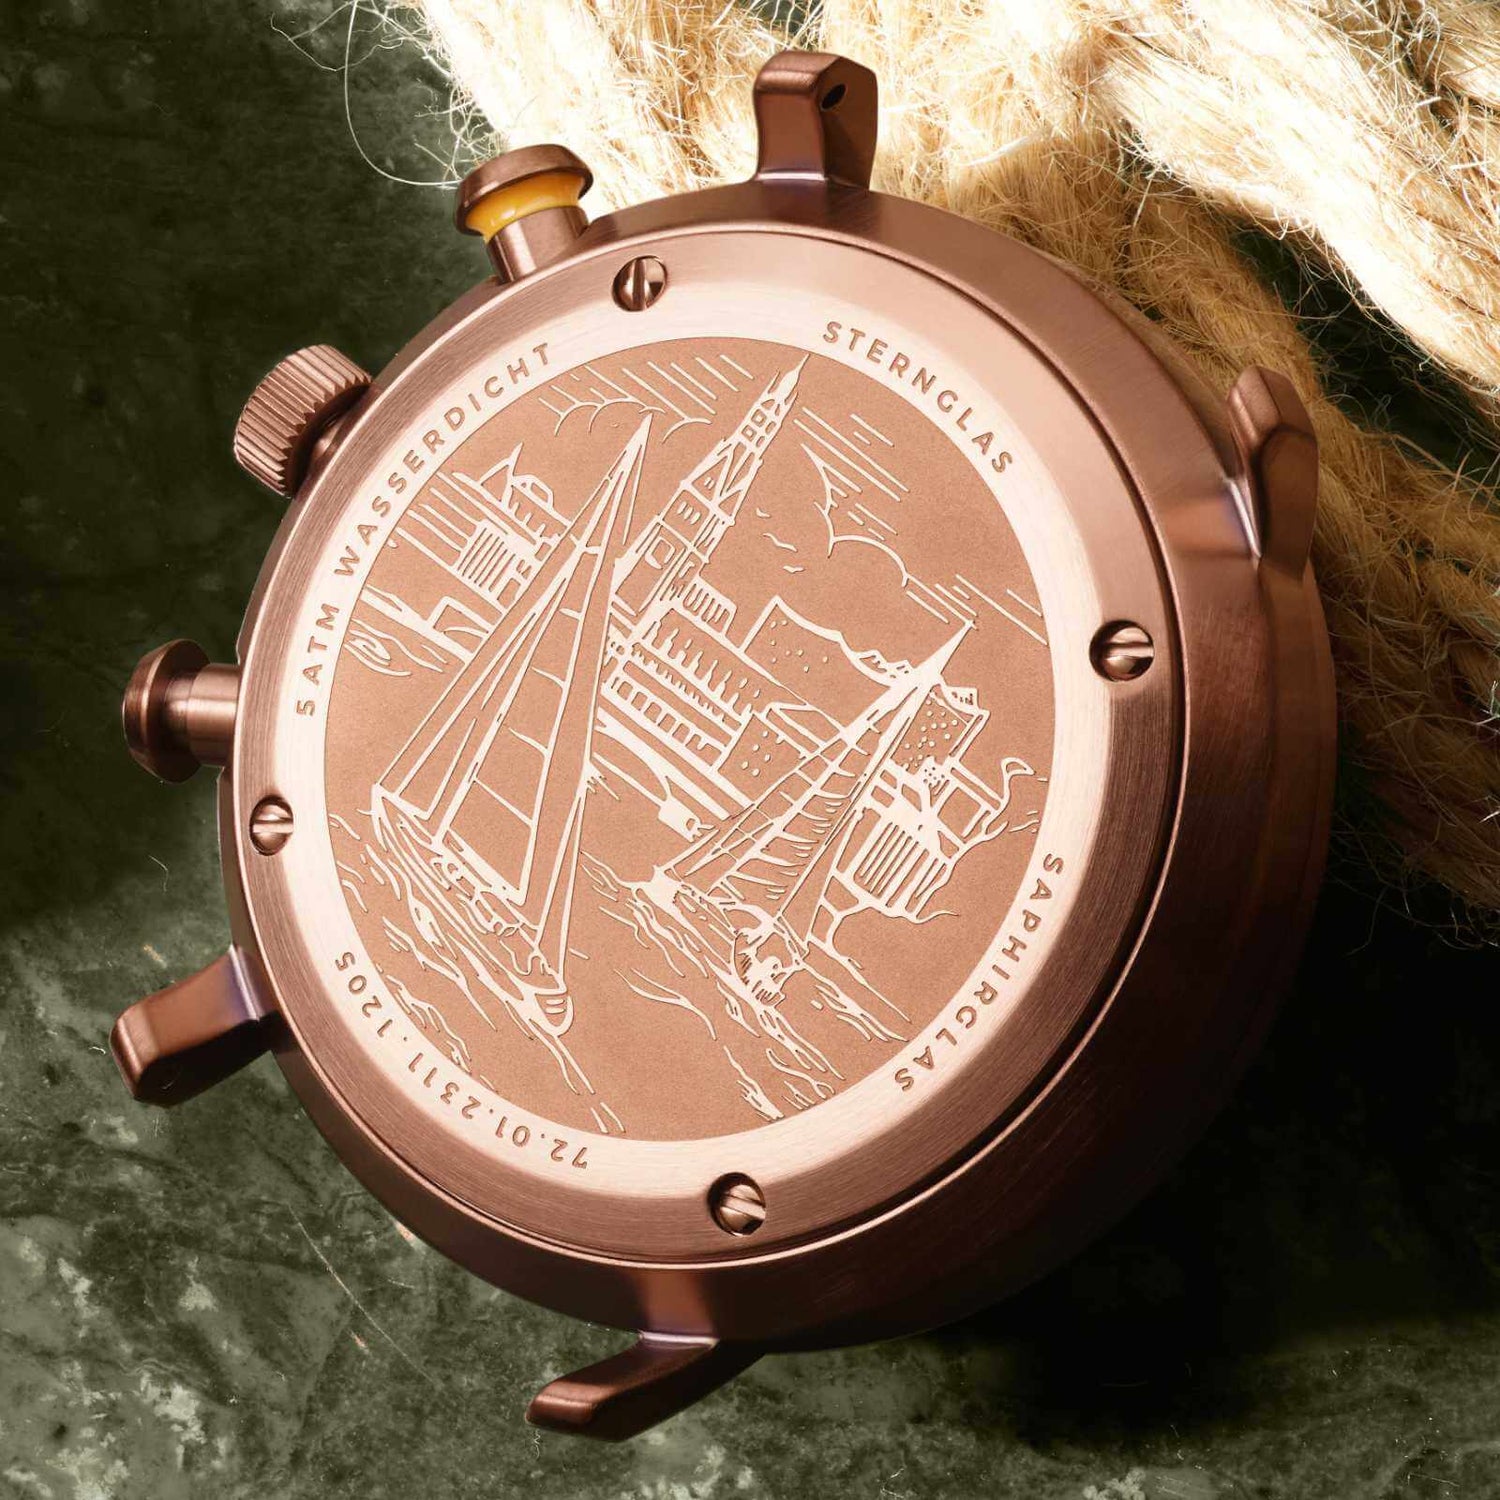 popup|Regatta engraving on the case back|As is typical for STERNGLAS timepieces, the engraving here is also a real eye-catcher: it shows two sailing boats on the Outer Alster. A symbol of adventure and our connection to our home city of Hamburg.